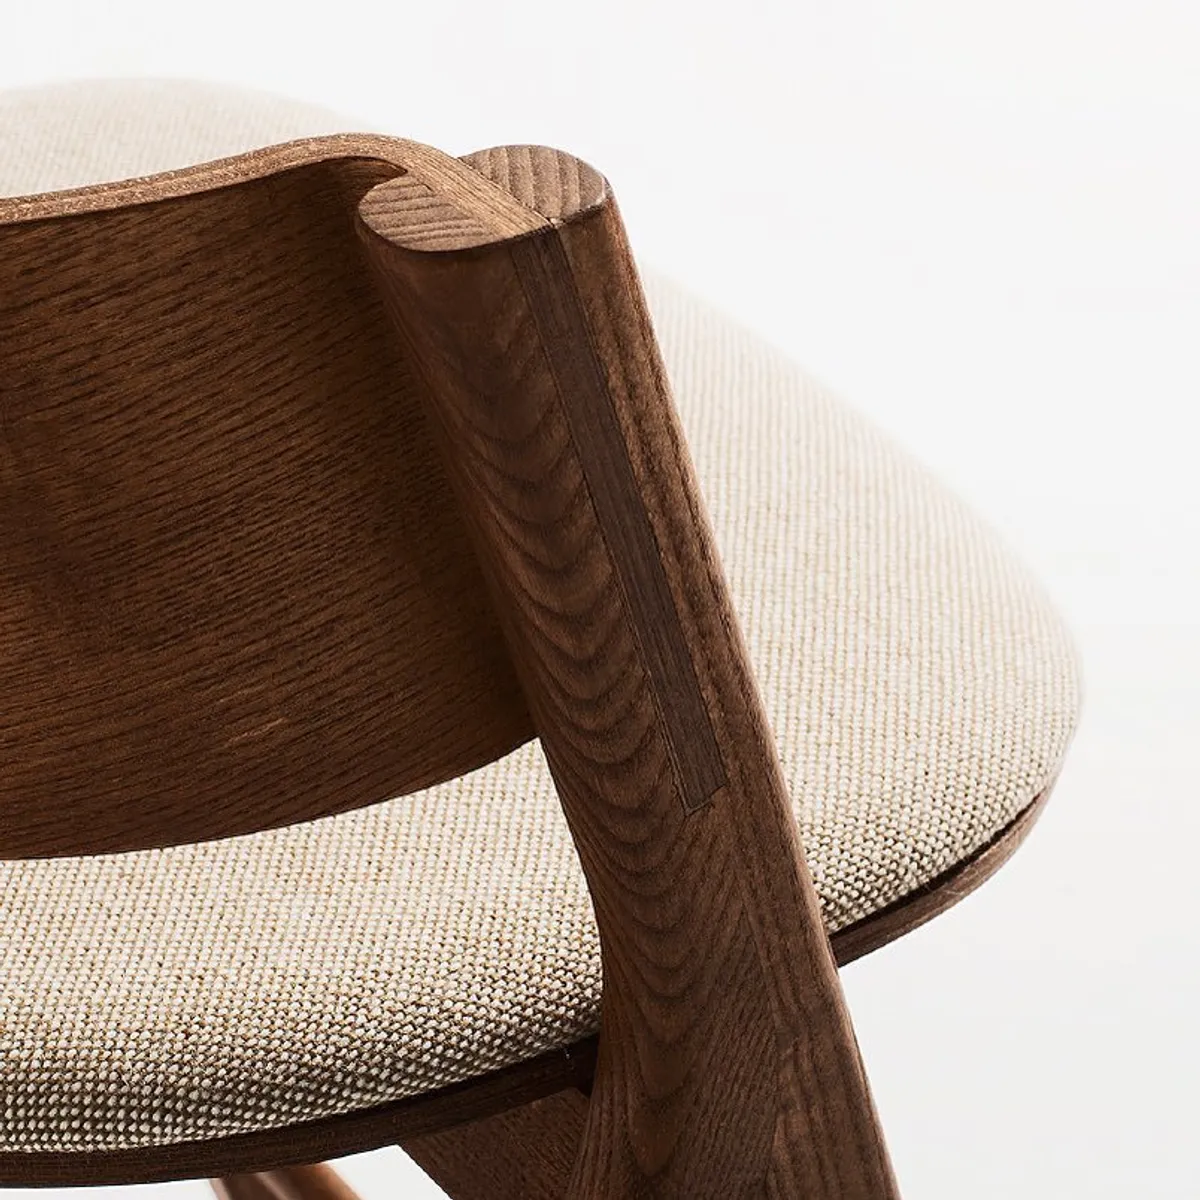 wood grain and upholstery Folly chair close up